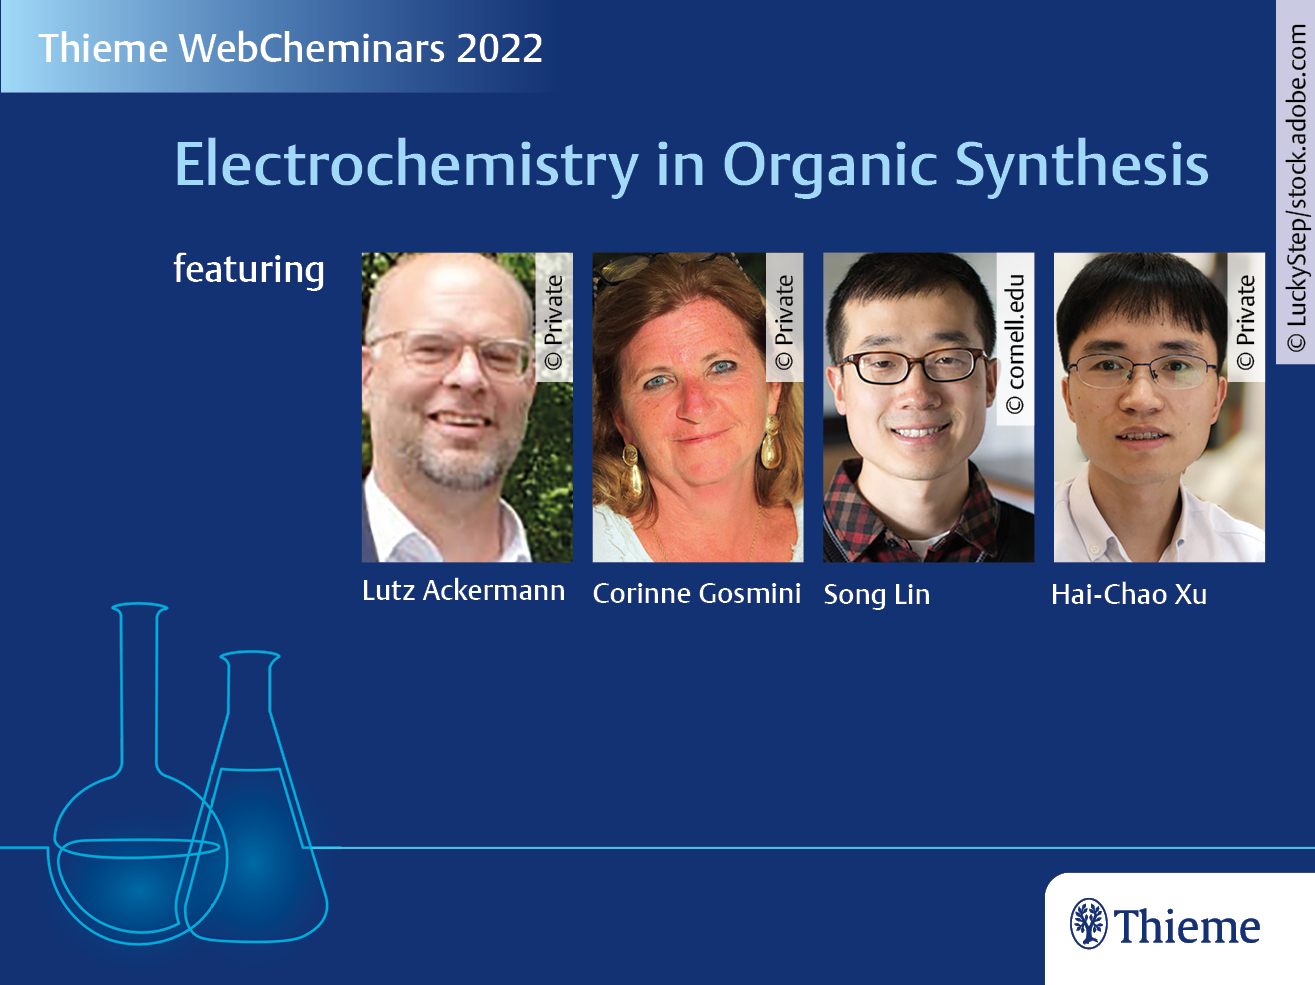 Electrochemistry in Organic Synthesis